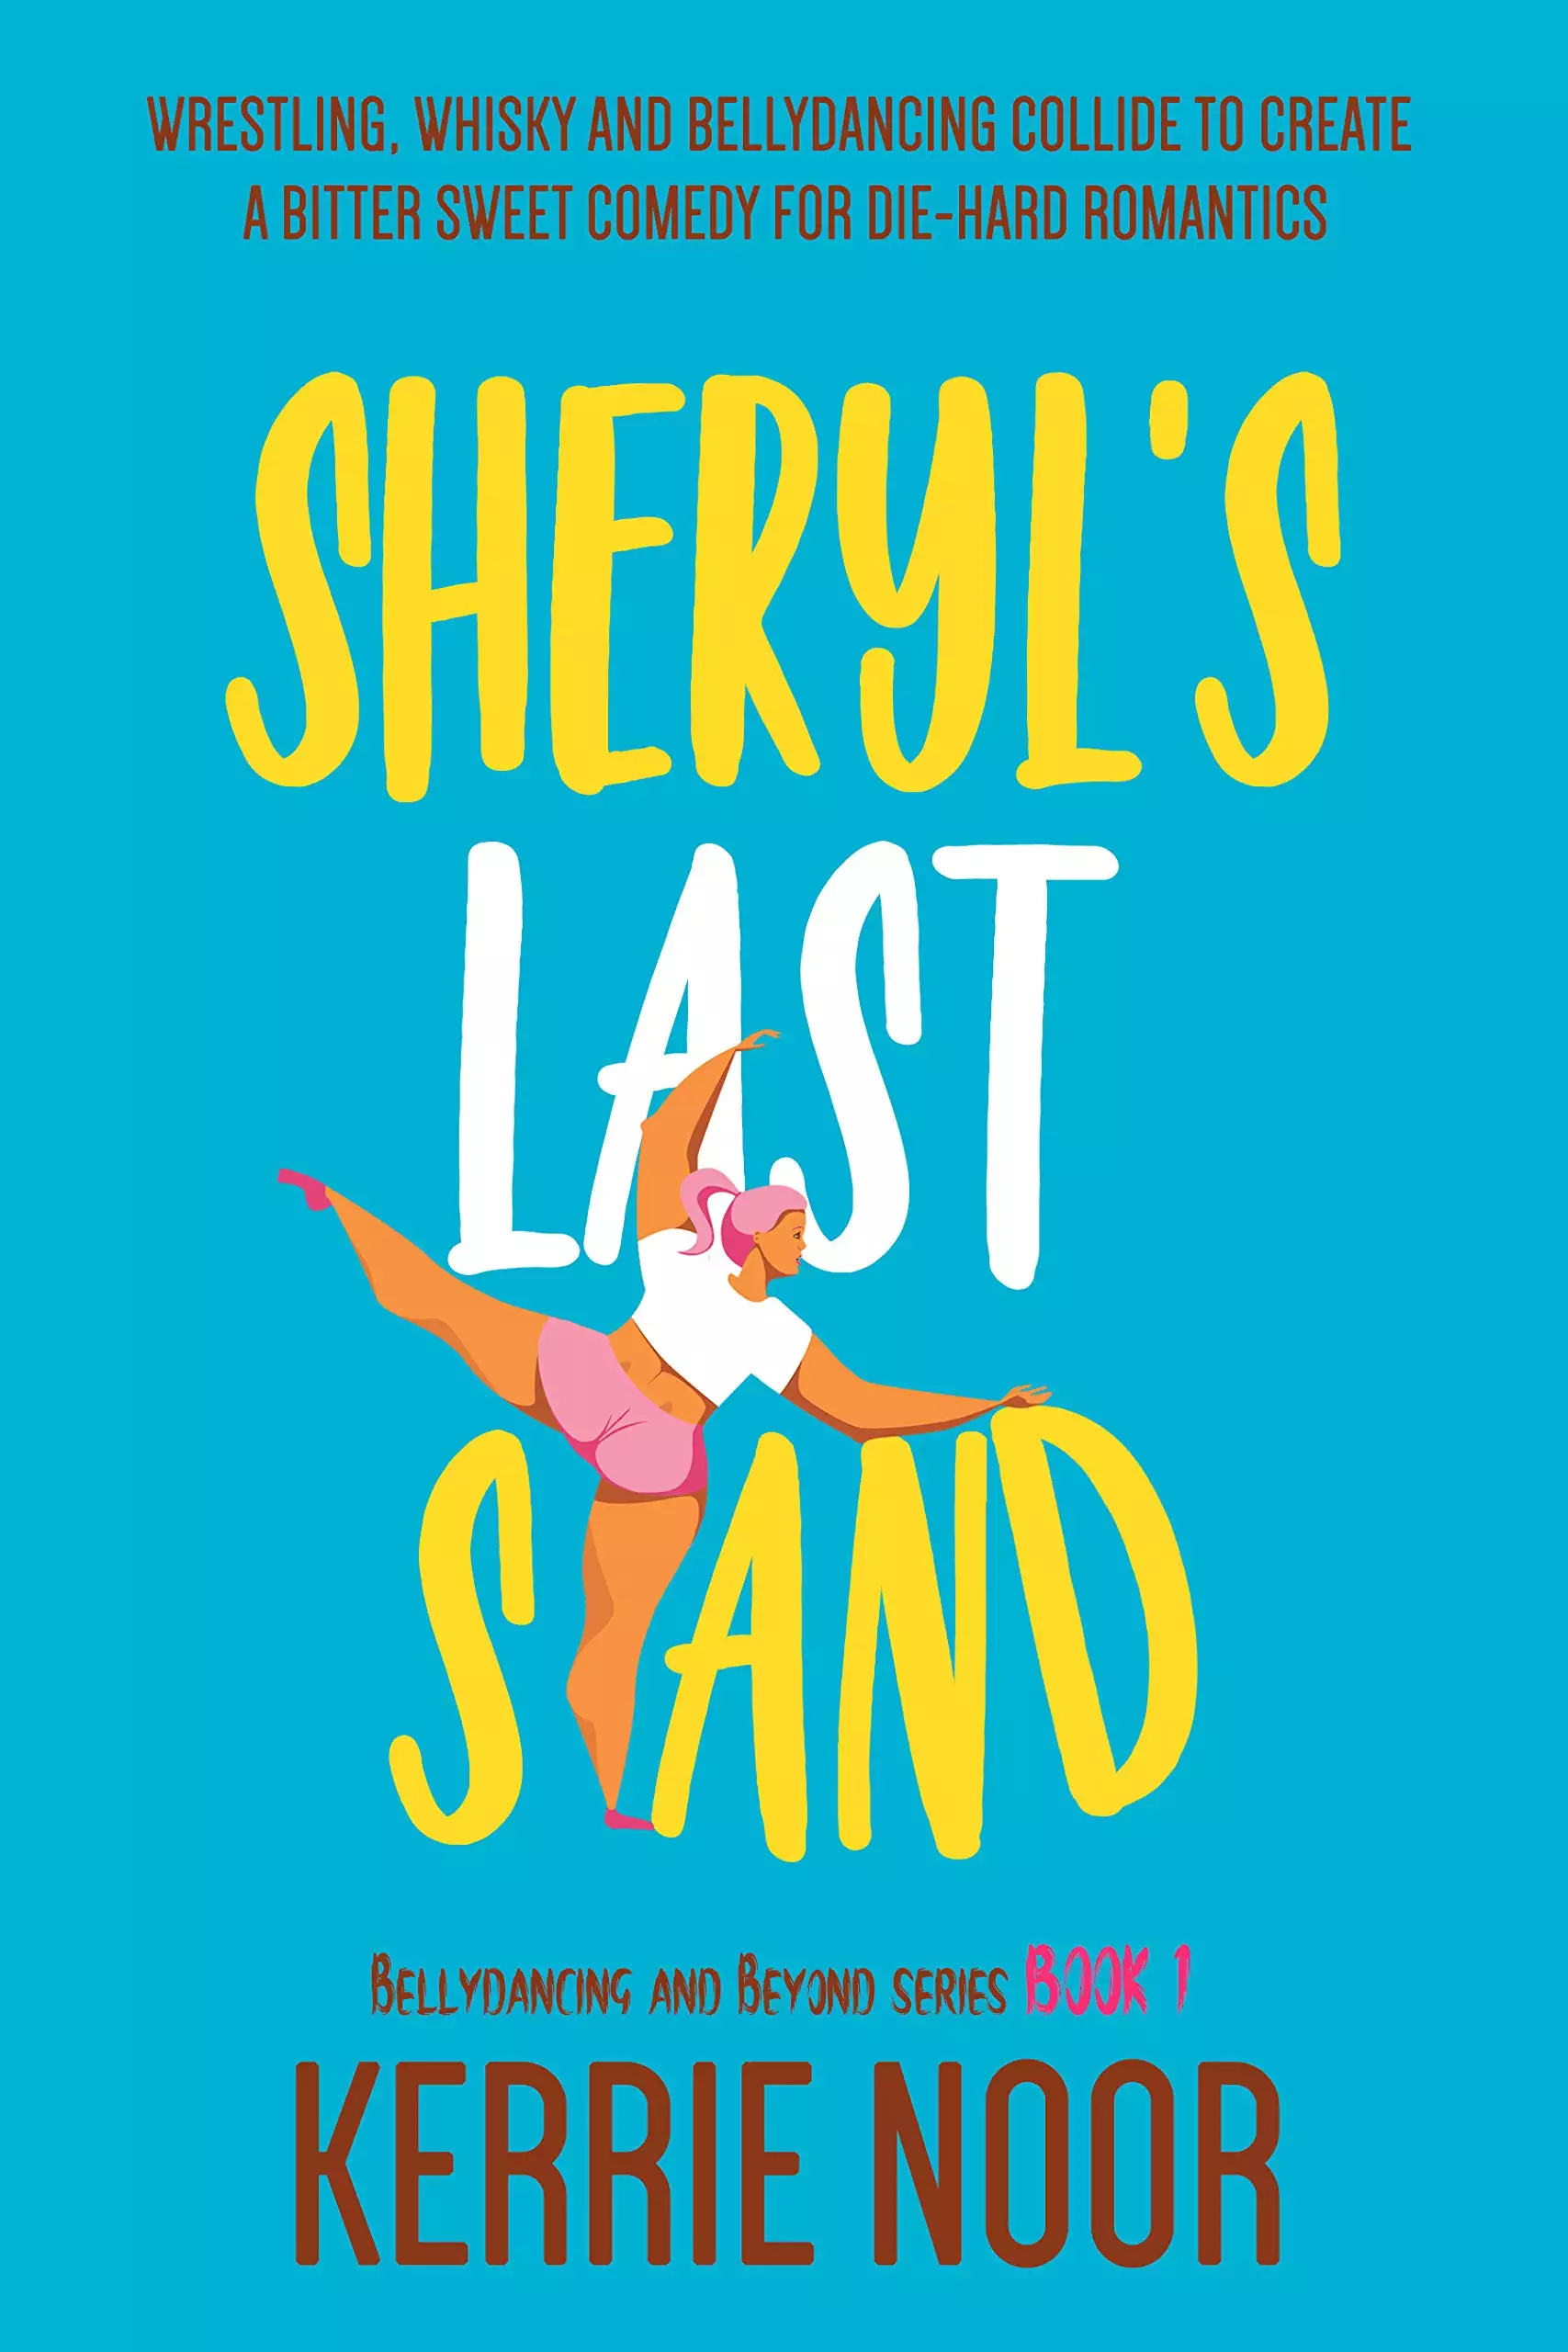 Sheryl's Last Stand: A Laugh Out Loud Romantic Comedy